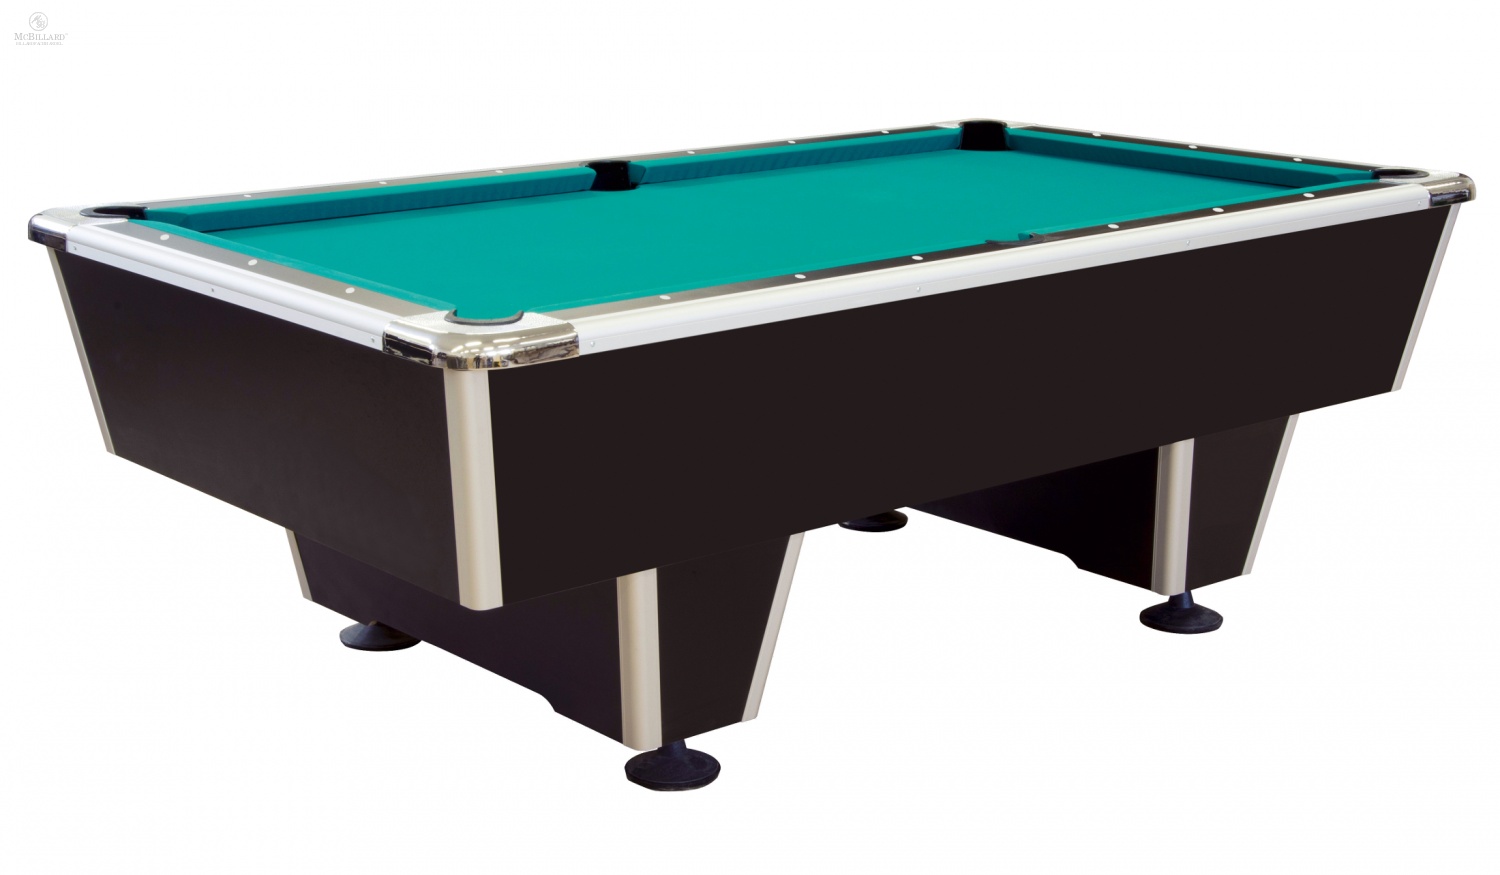 Pool Billiard Table - Orlando - without ball return, 8 ft.